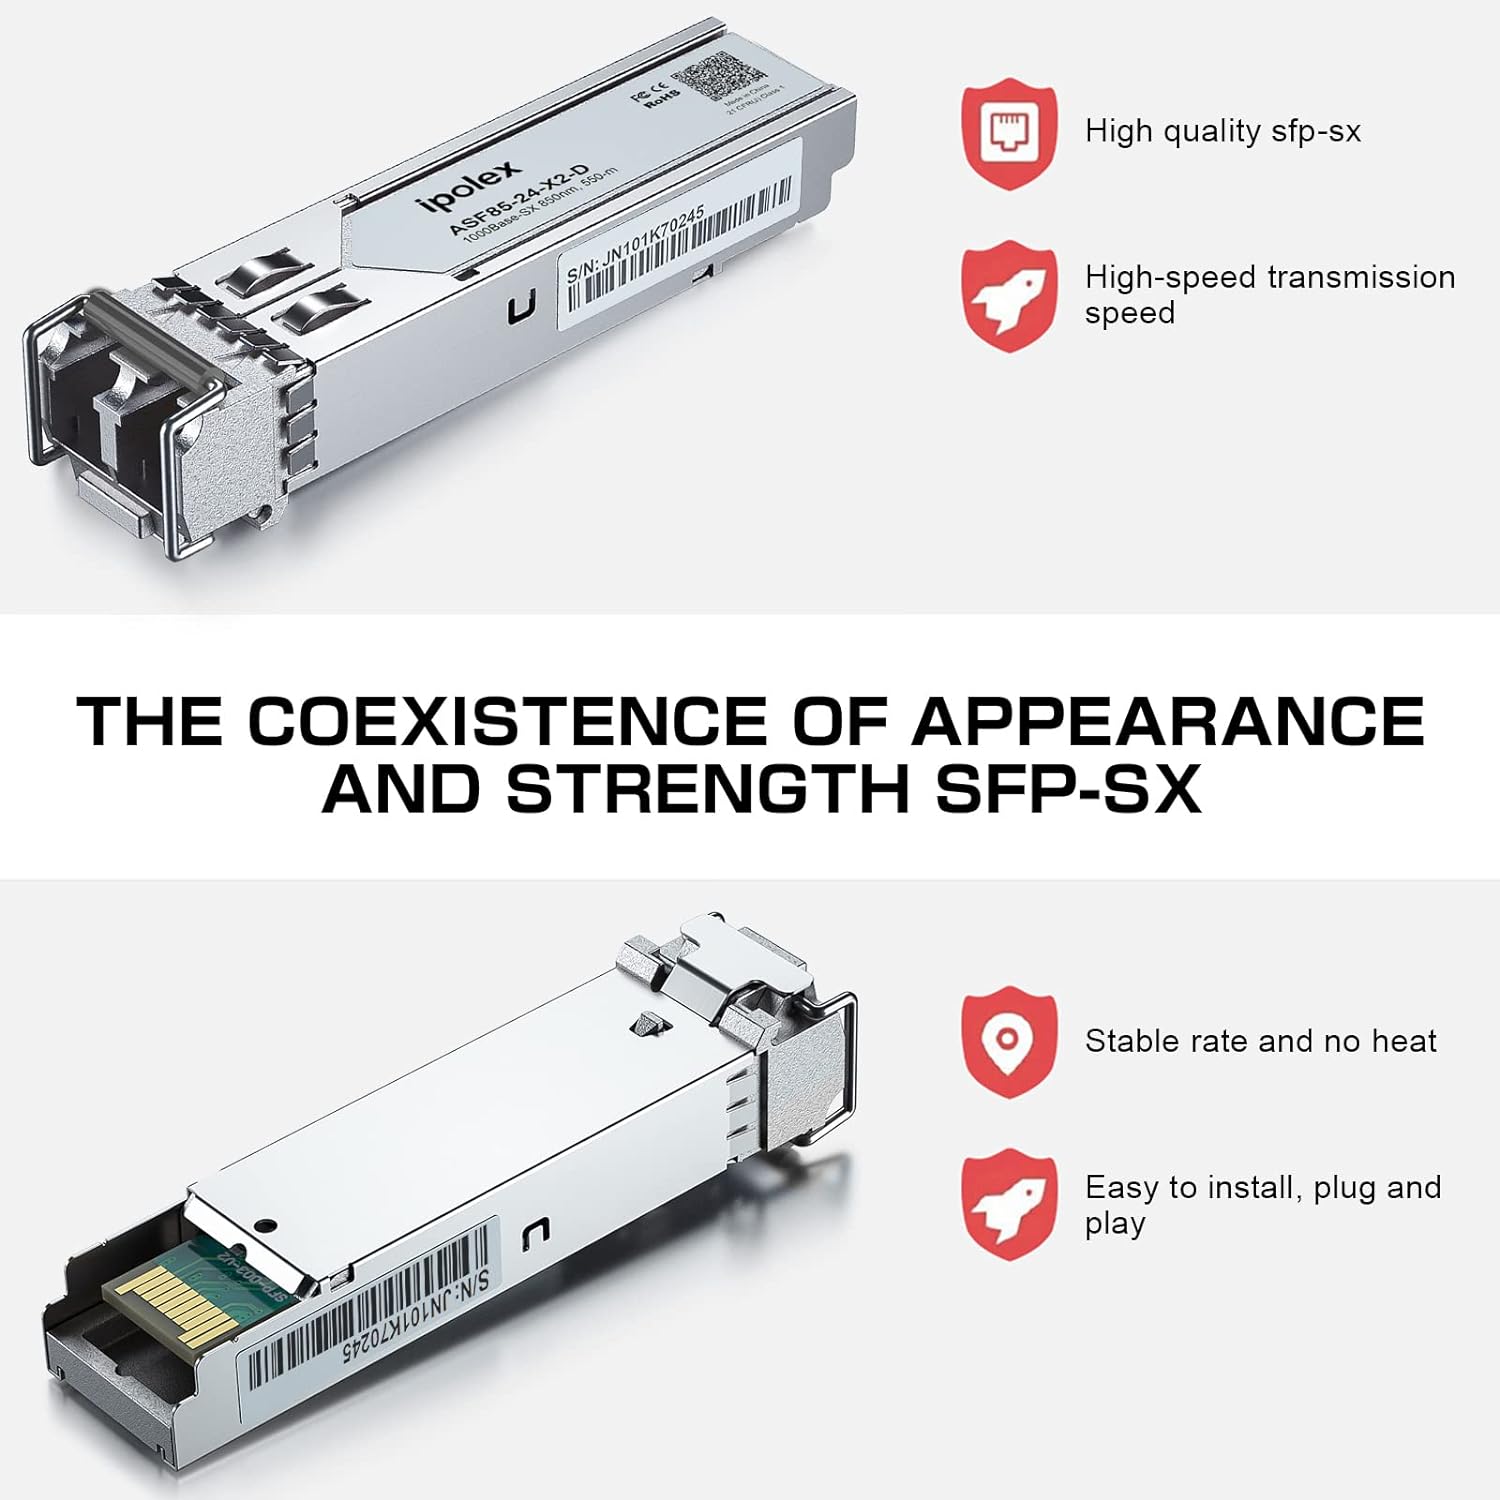 1.25G SFP Transceiver 1000Base-LX,Compatible with Netgear AGM732F and 1 Pack of 5M Fiber Patch Cable